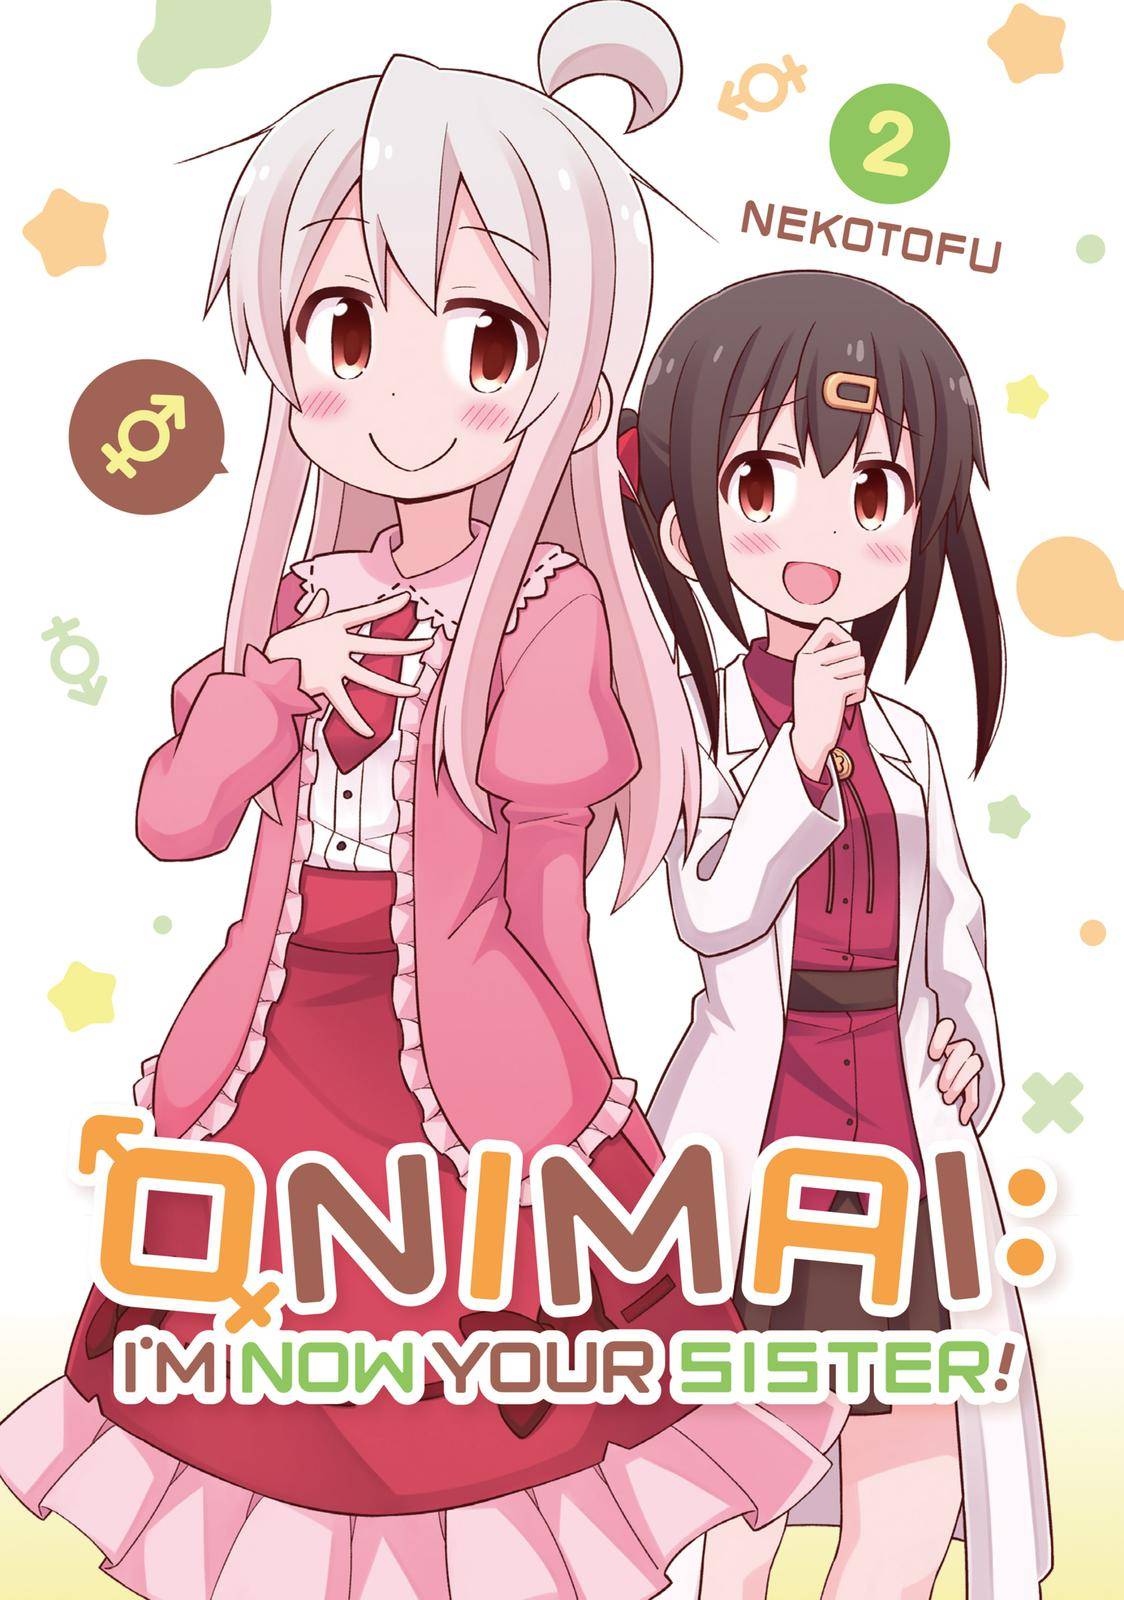 ONIMAI - I'm Now Your Sister! - chapter 11 - #1